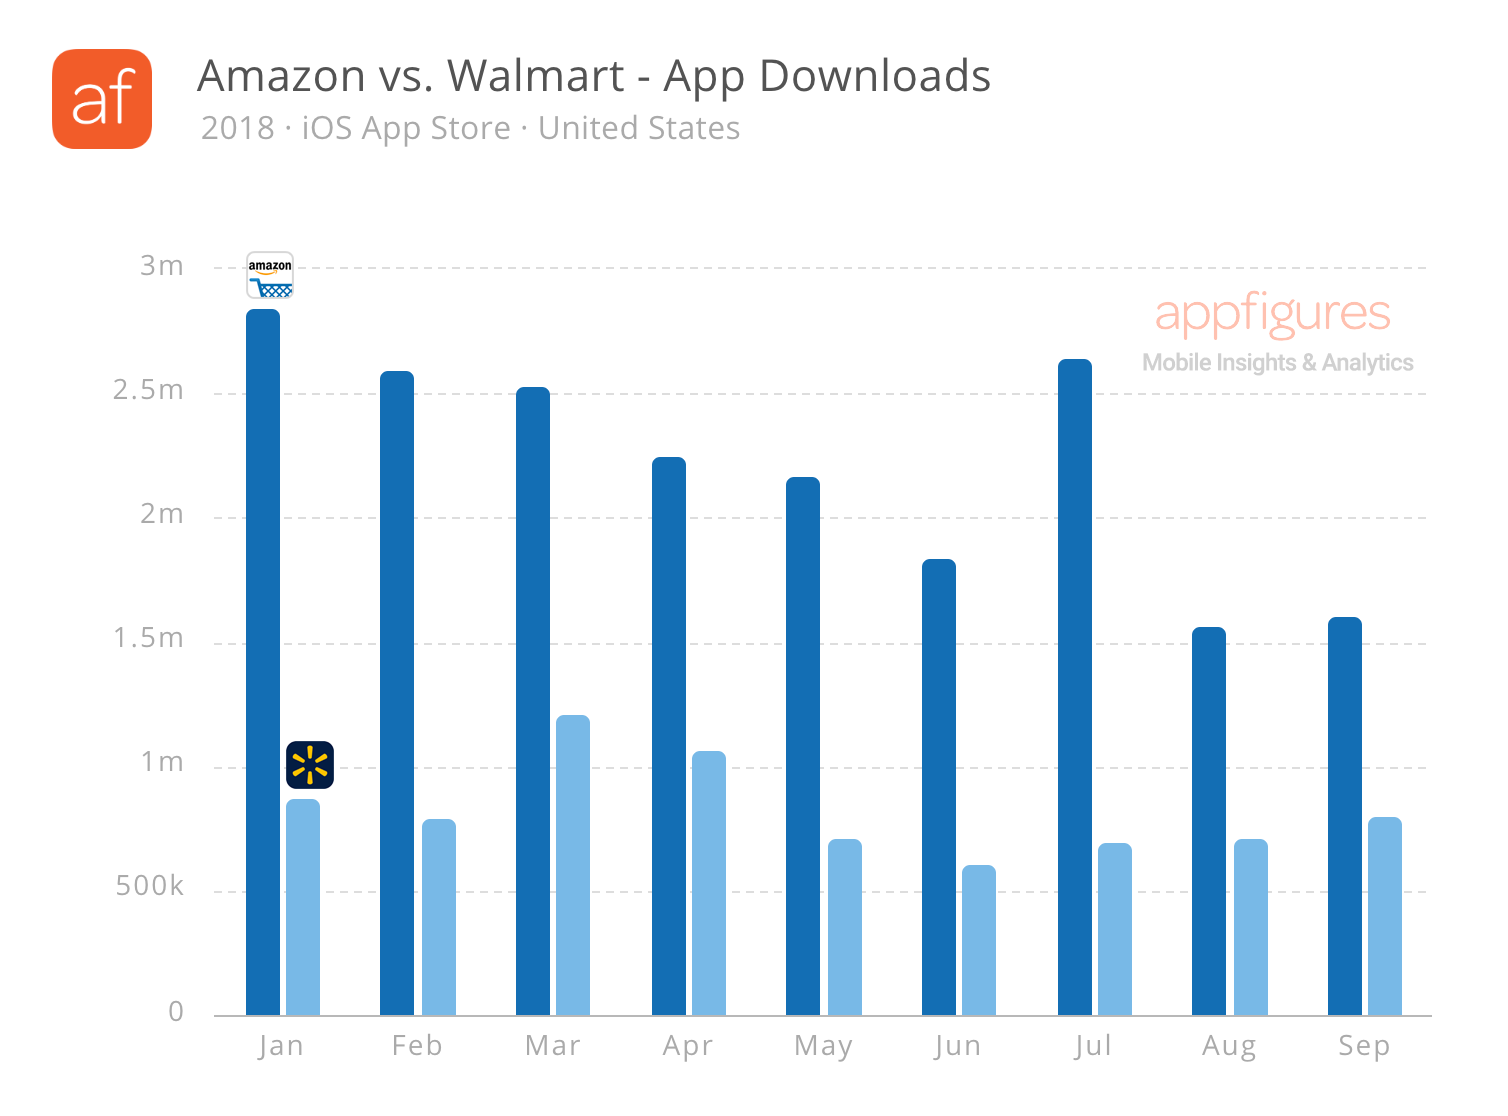 Estimated downloads for Amazon and Walmart in the U.S. App Store (2018)